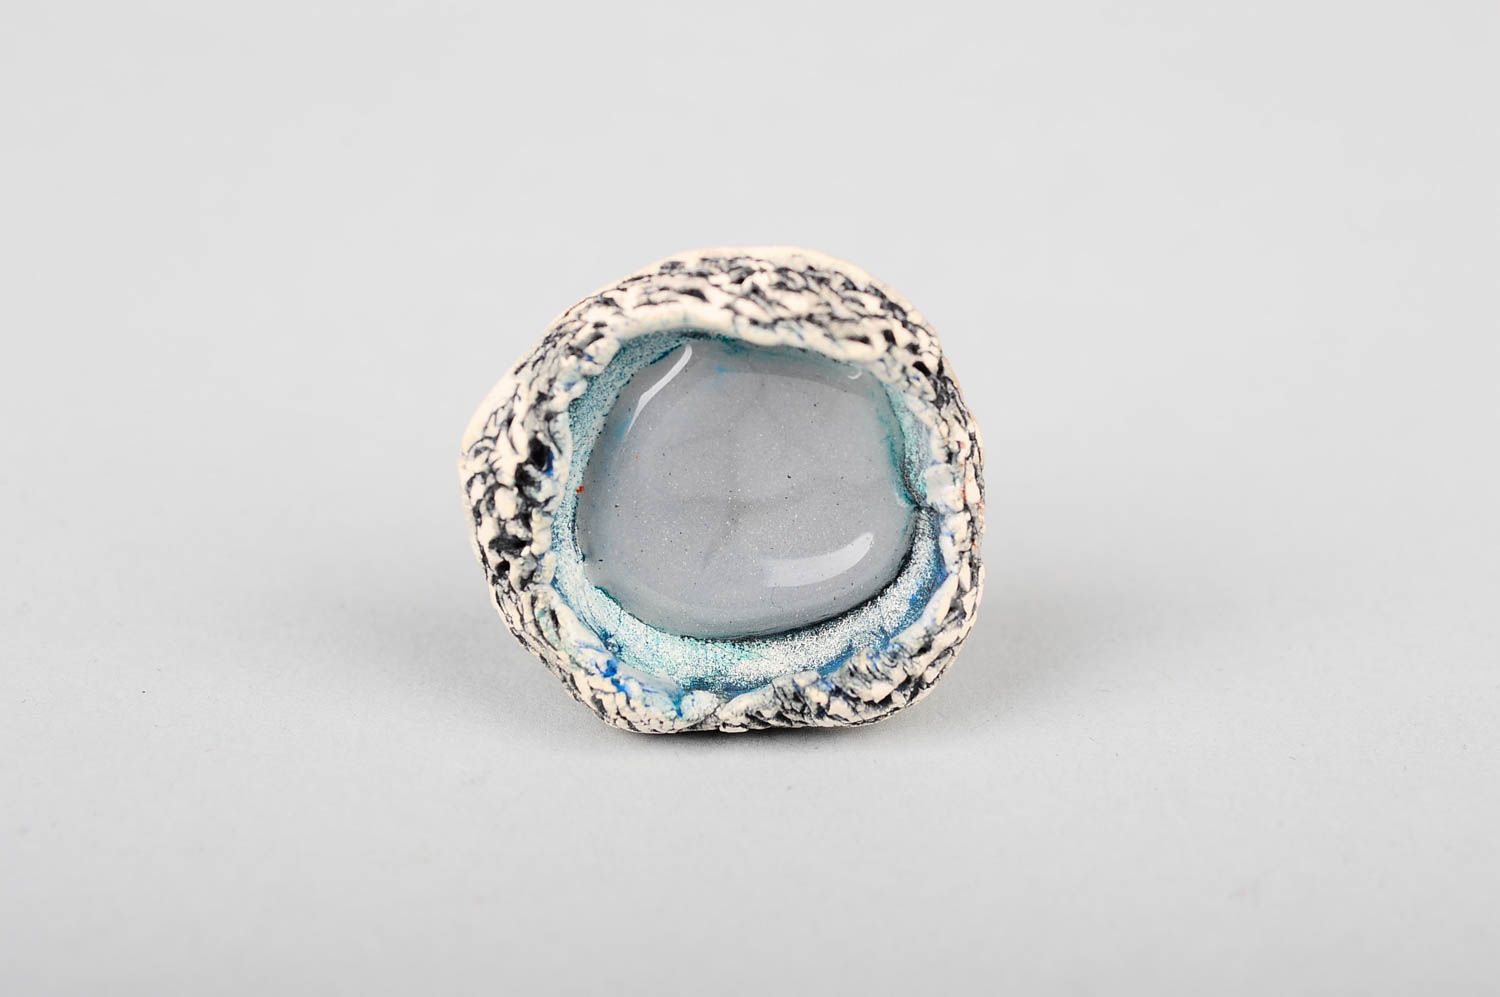 Unusual handmade clay ring ceramic ring design fashion trends gifts for her photo 1